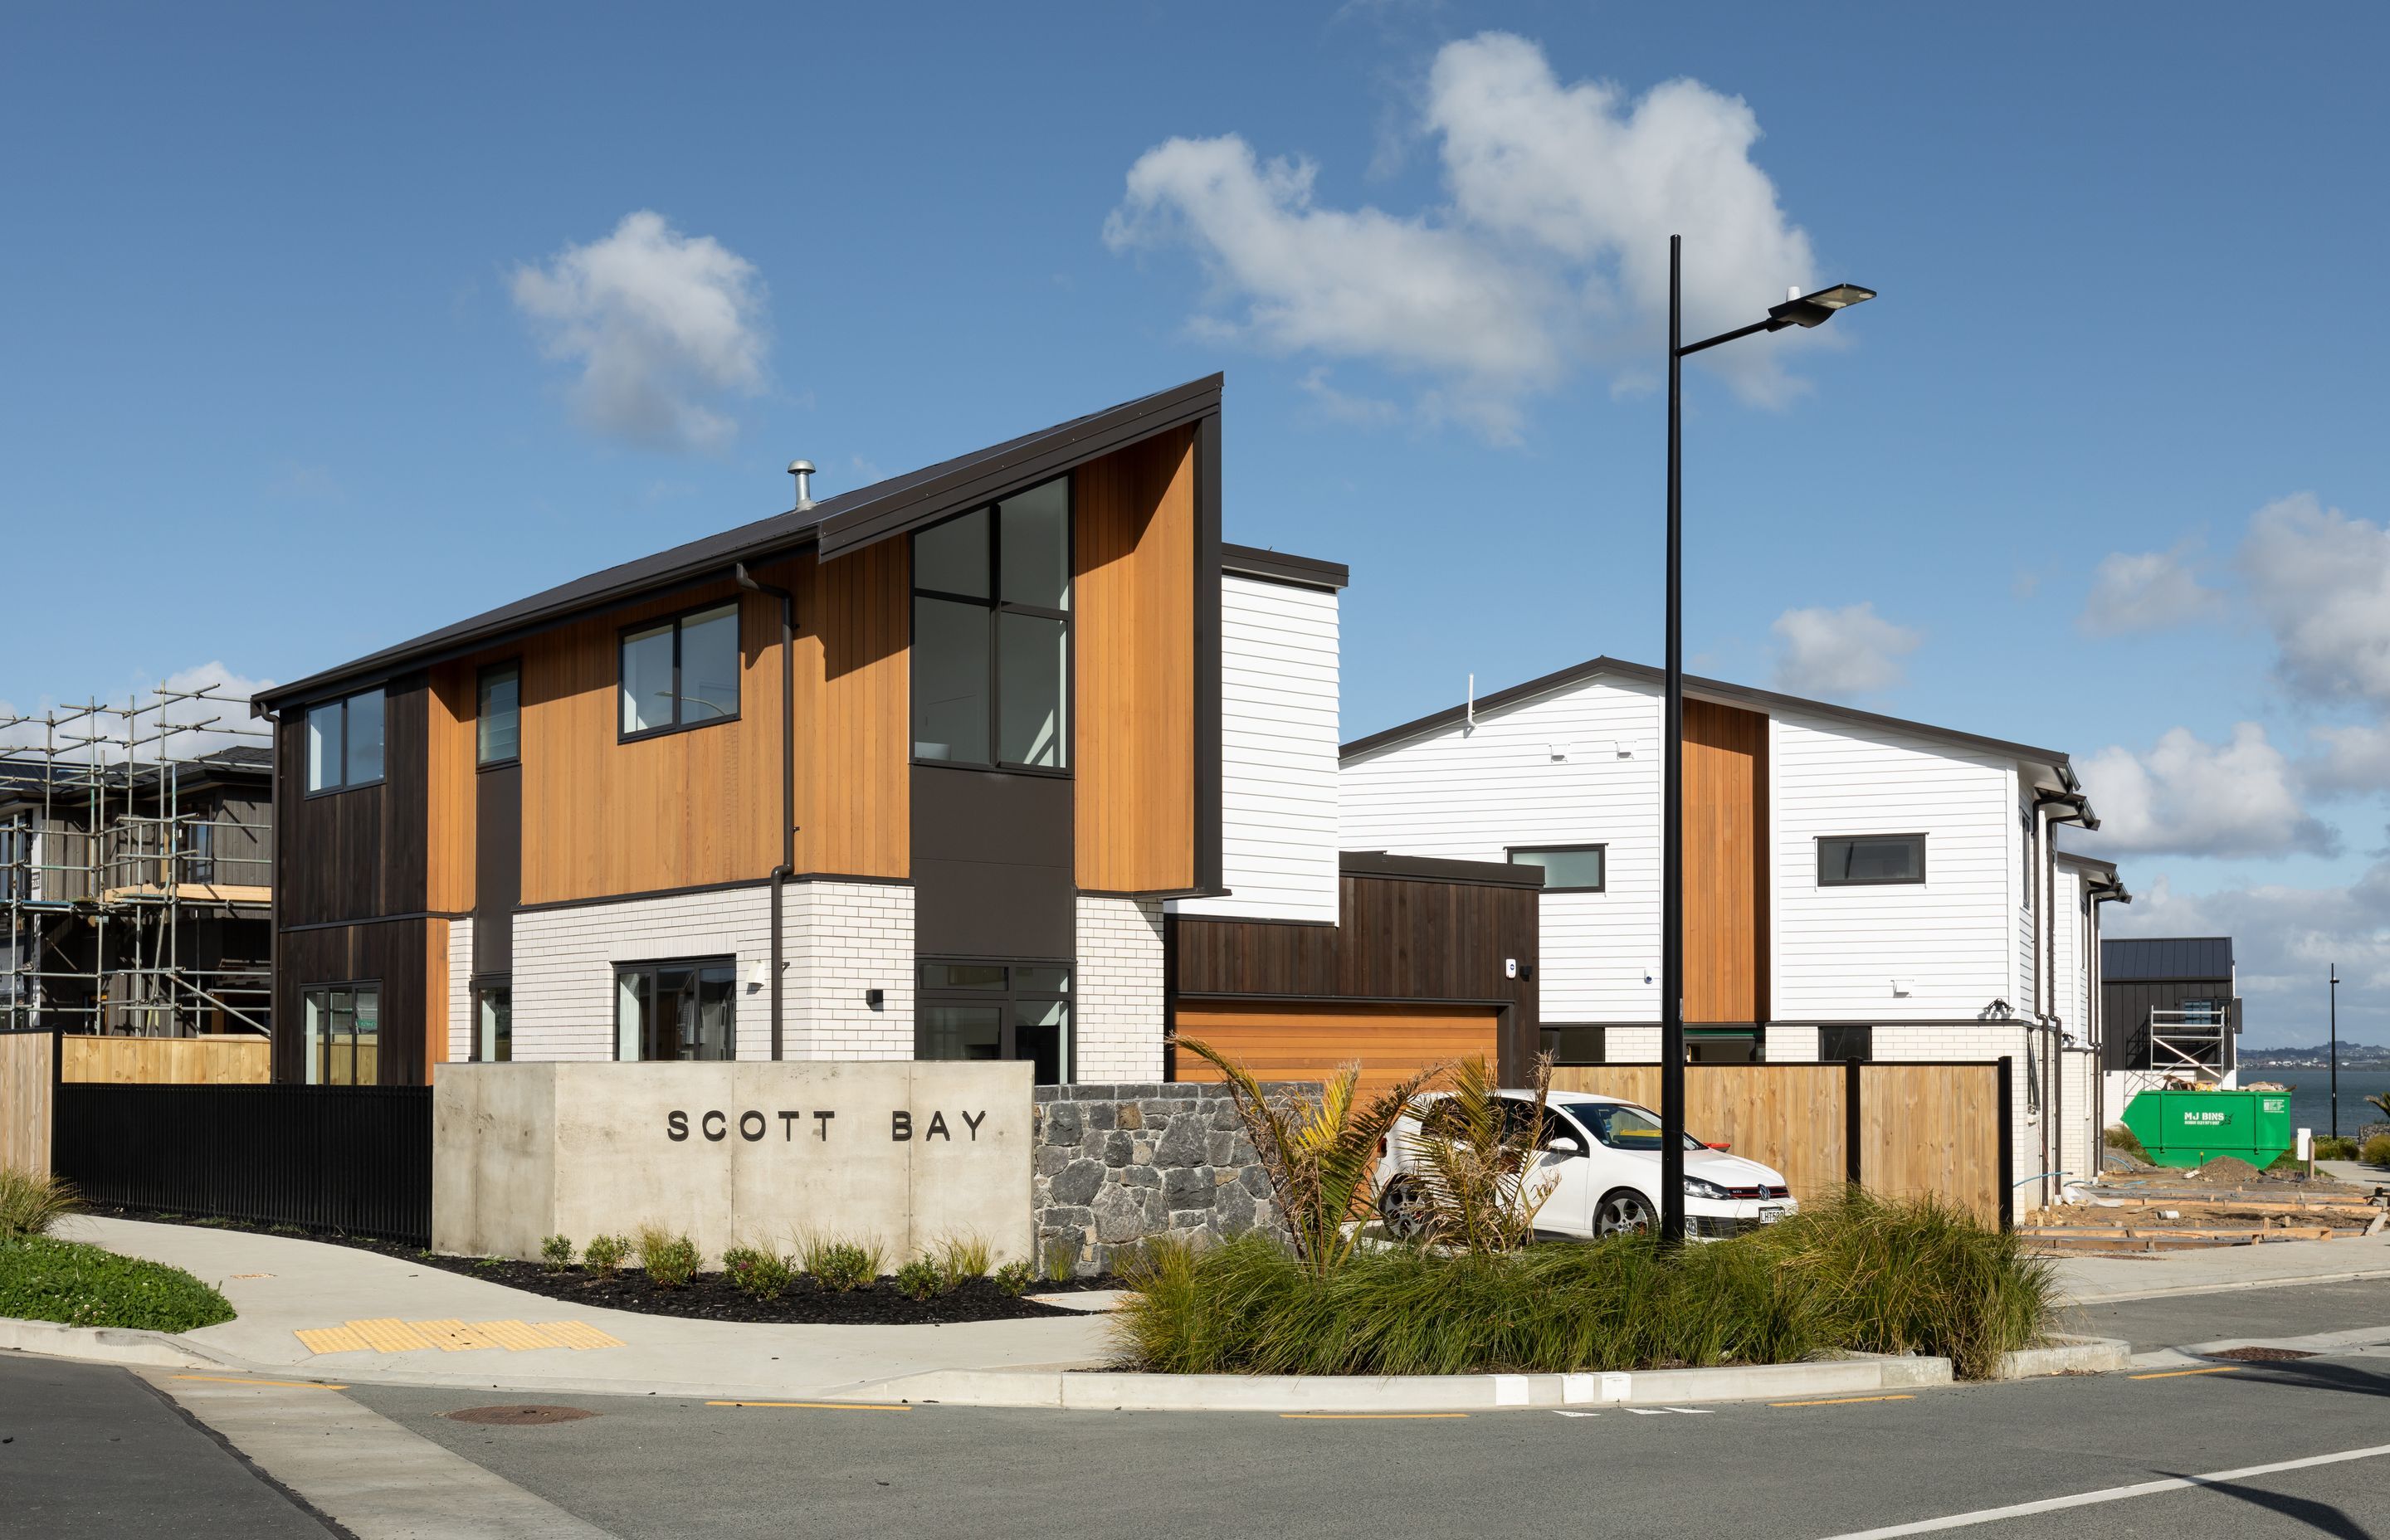 CPMC acted in the capacity of development manager and project manager for Hobsonville's Scott Bay development, which features 75 exclusive lots.